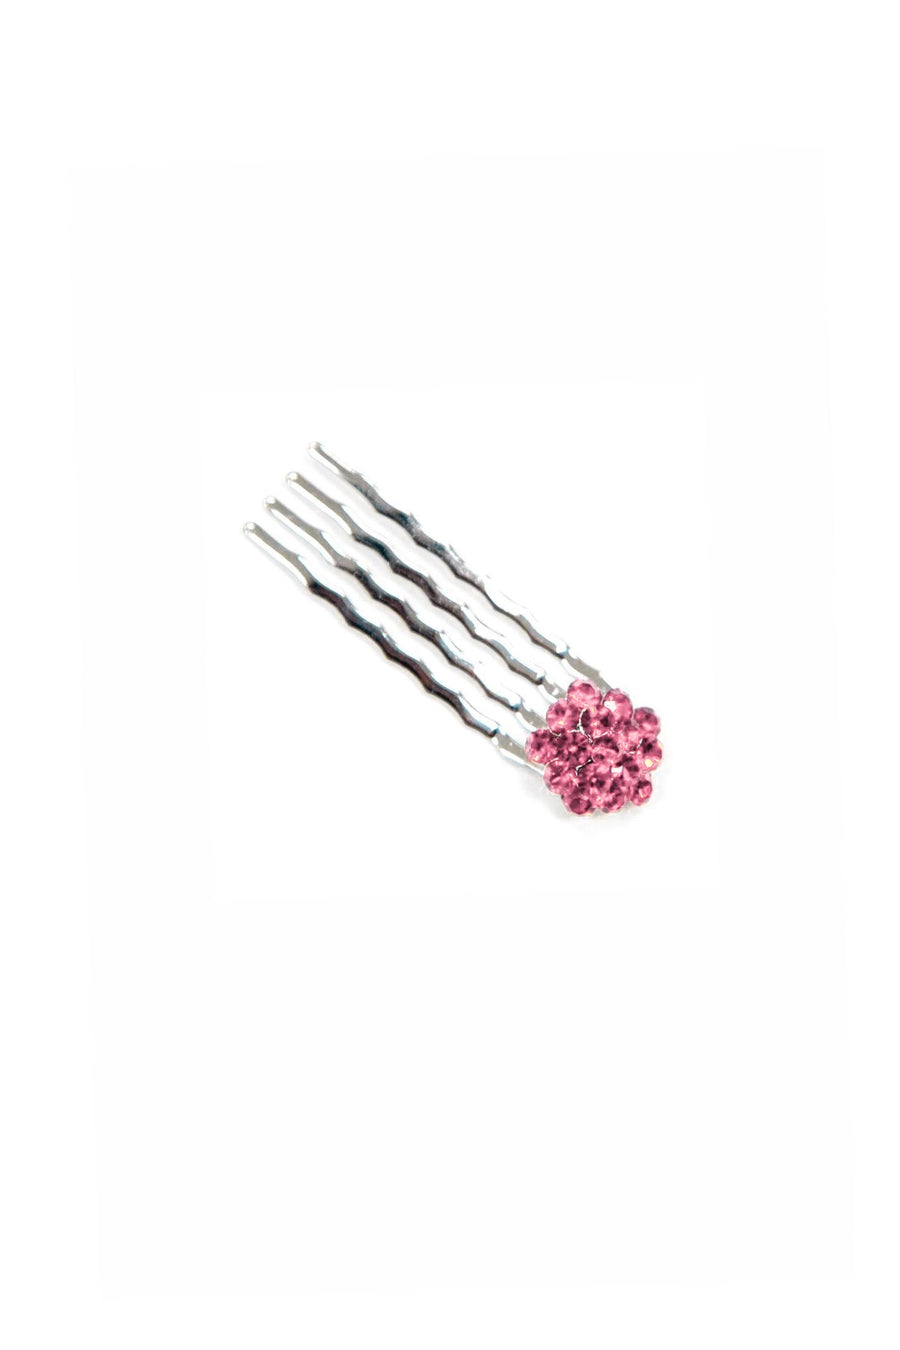 Soho Style Hair Comb PINK Crystal Cluster Mini Hair Comb